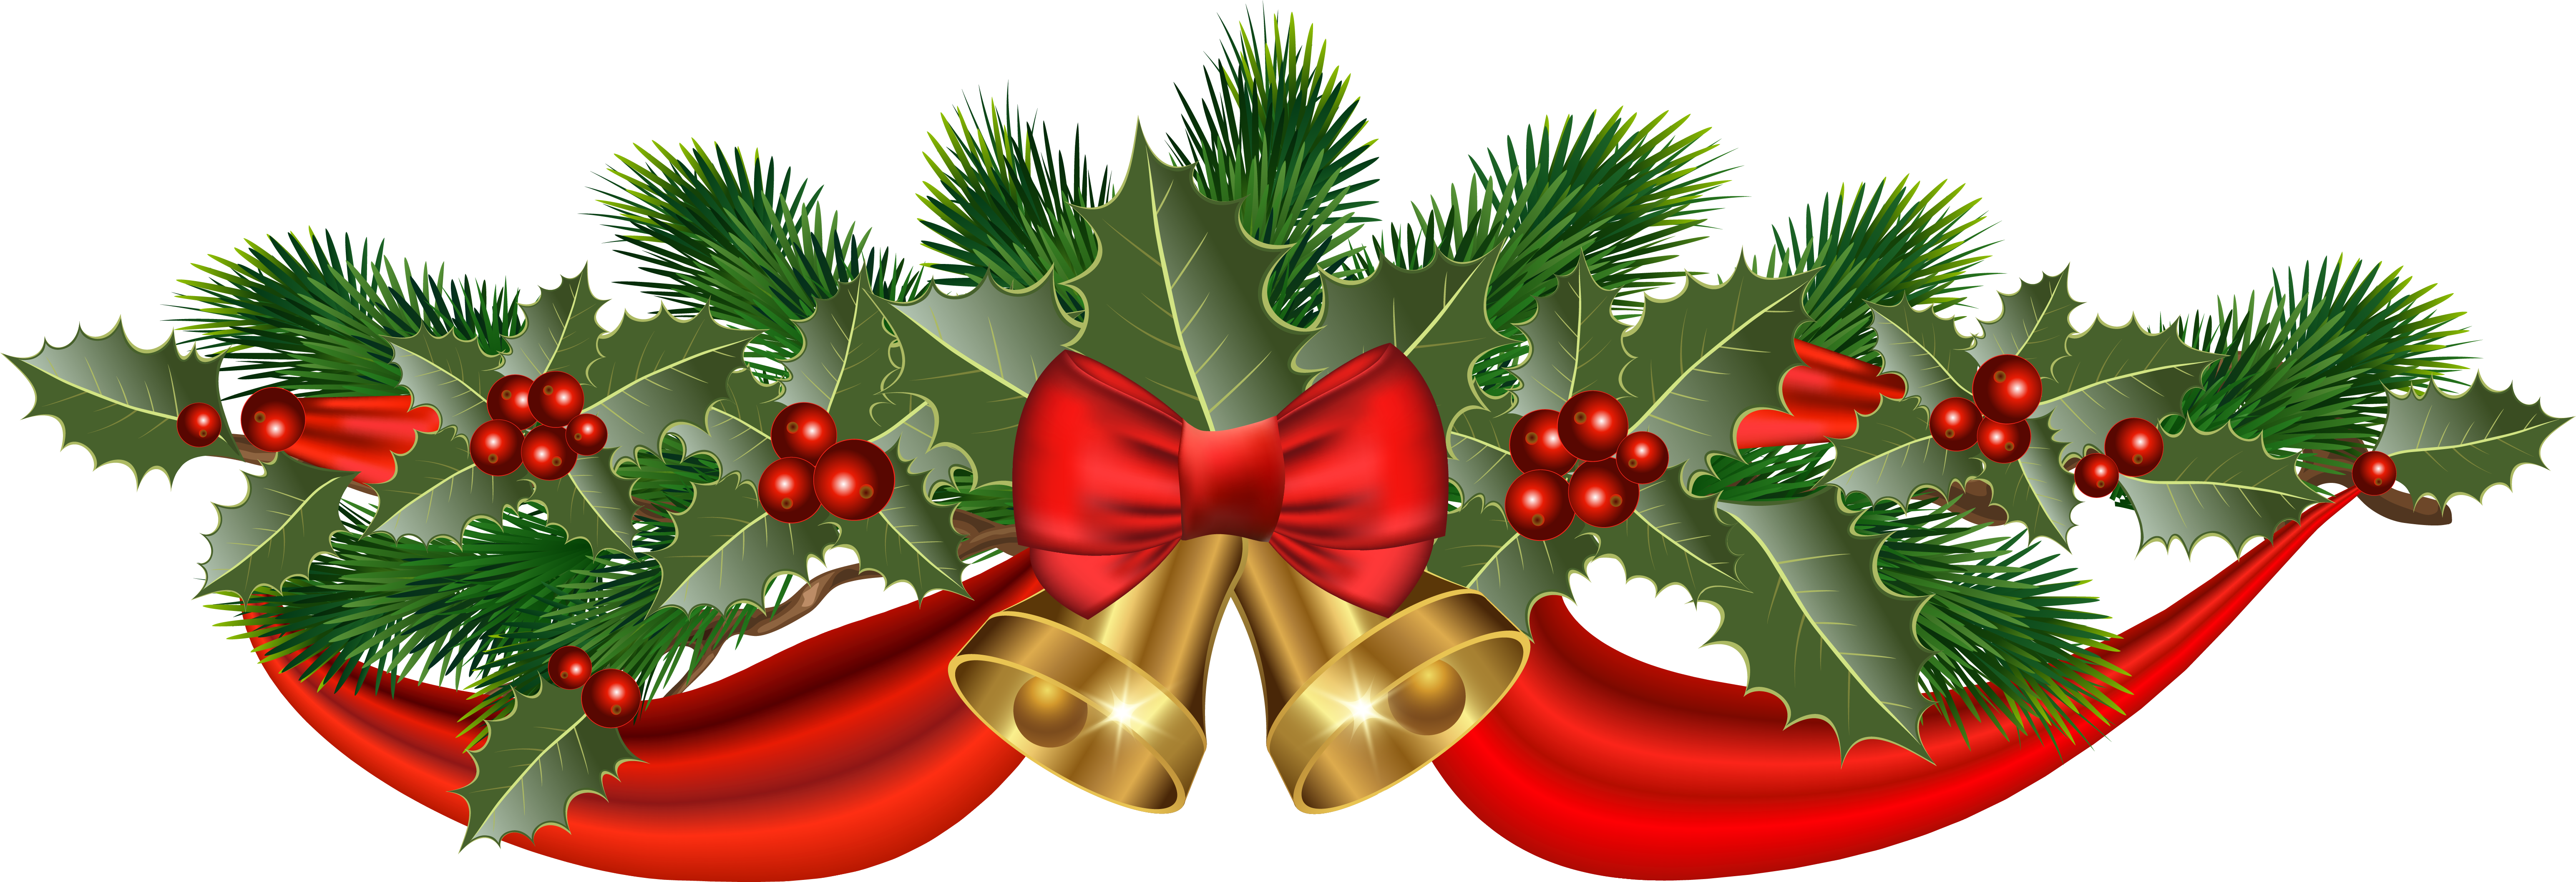 Red Christmas Bow clipart. Free download transparent .PNG